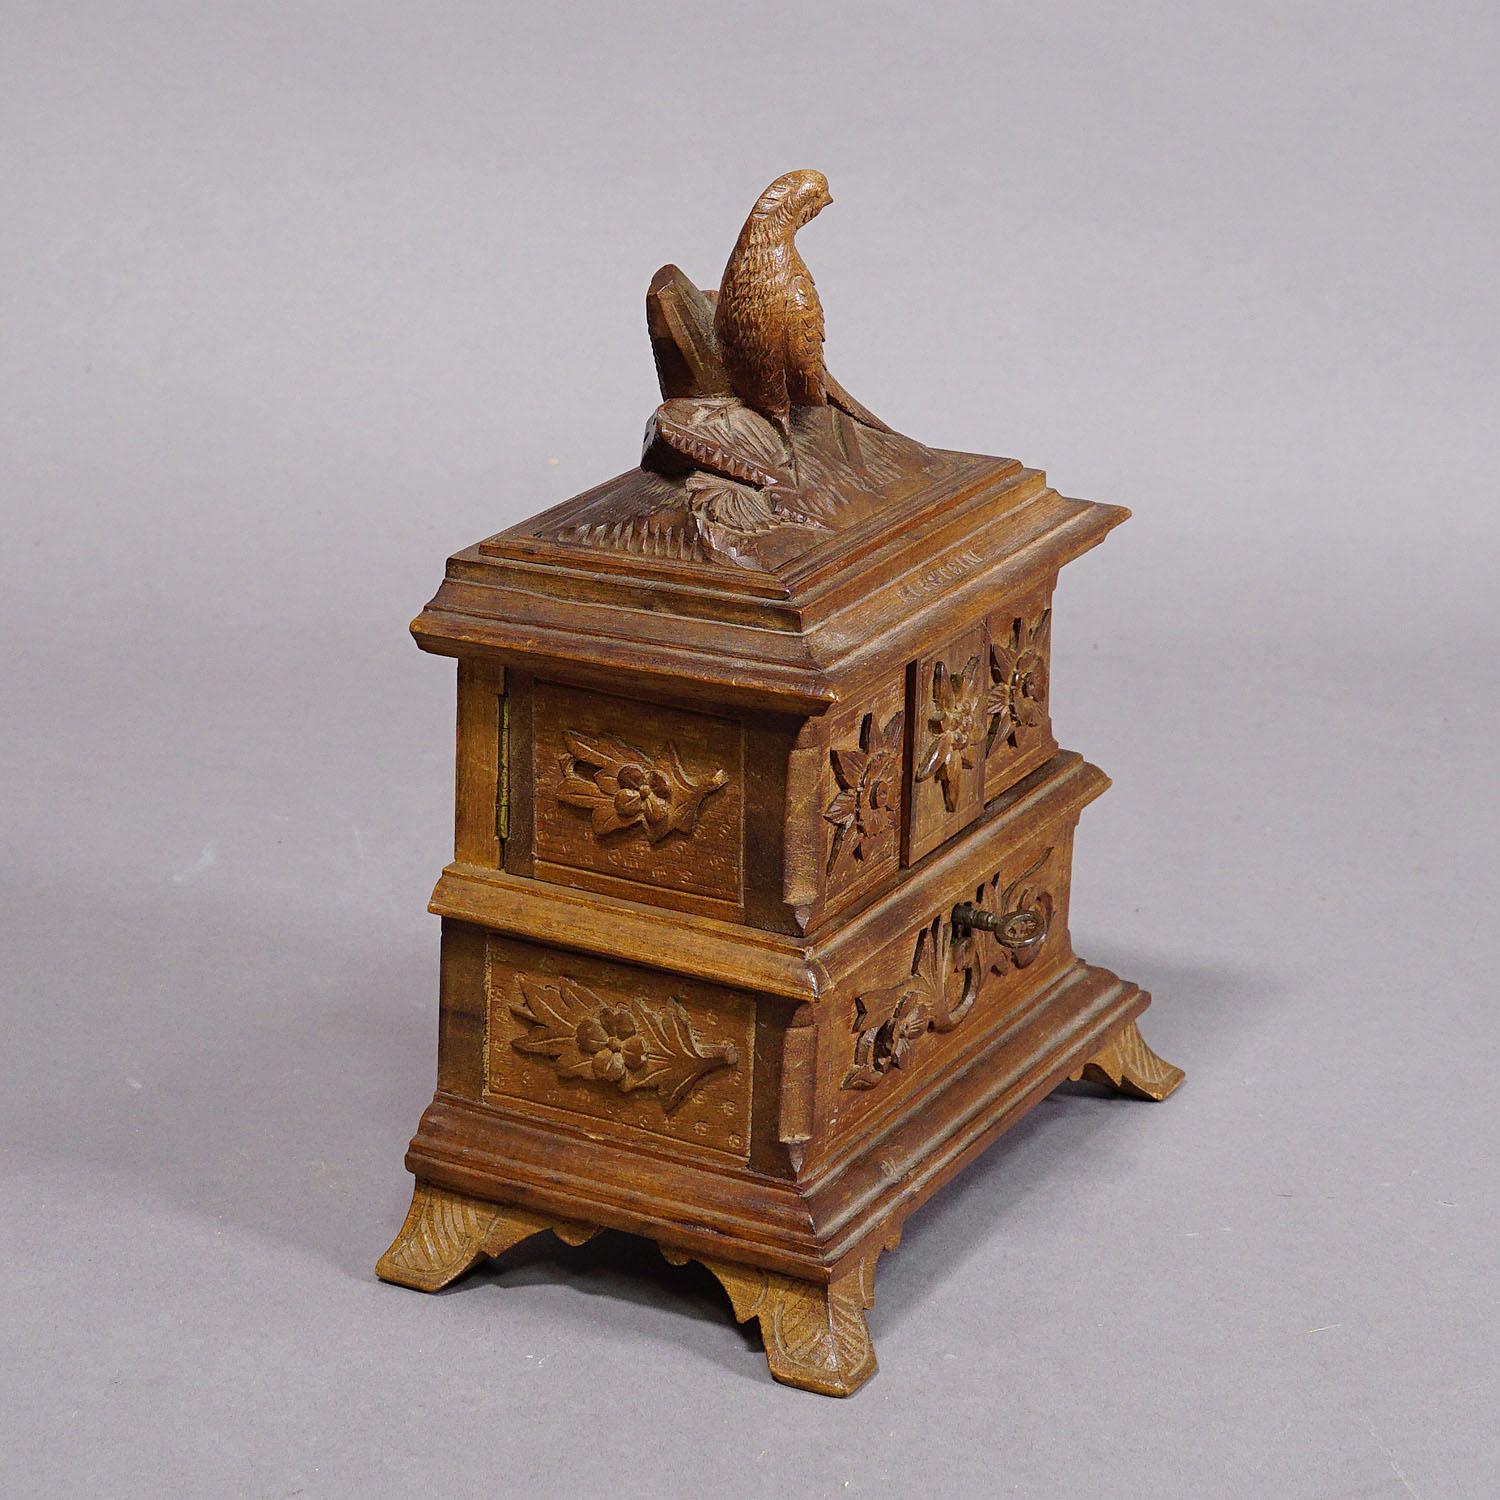 Black Forest Antique Wooden Carved Edelweis Jewelry Box with Bird, Brienz ca 1900